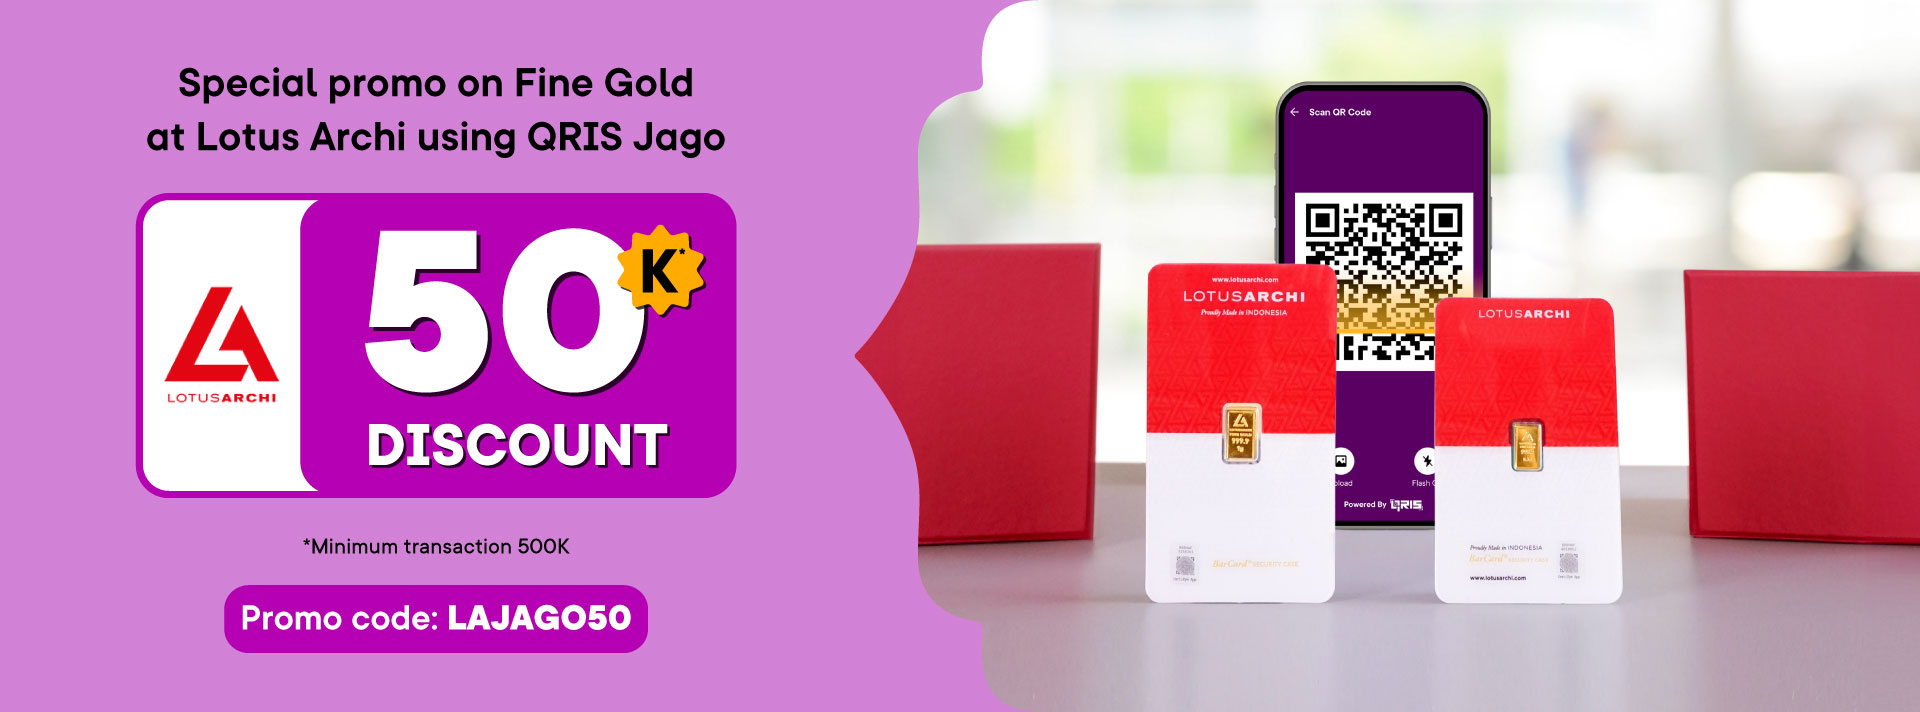 Save Rp50,000 on fine gold purchase using Jago QRIS